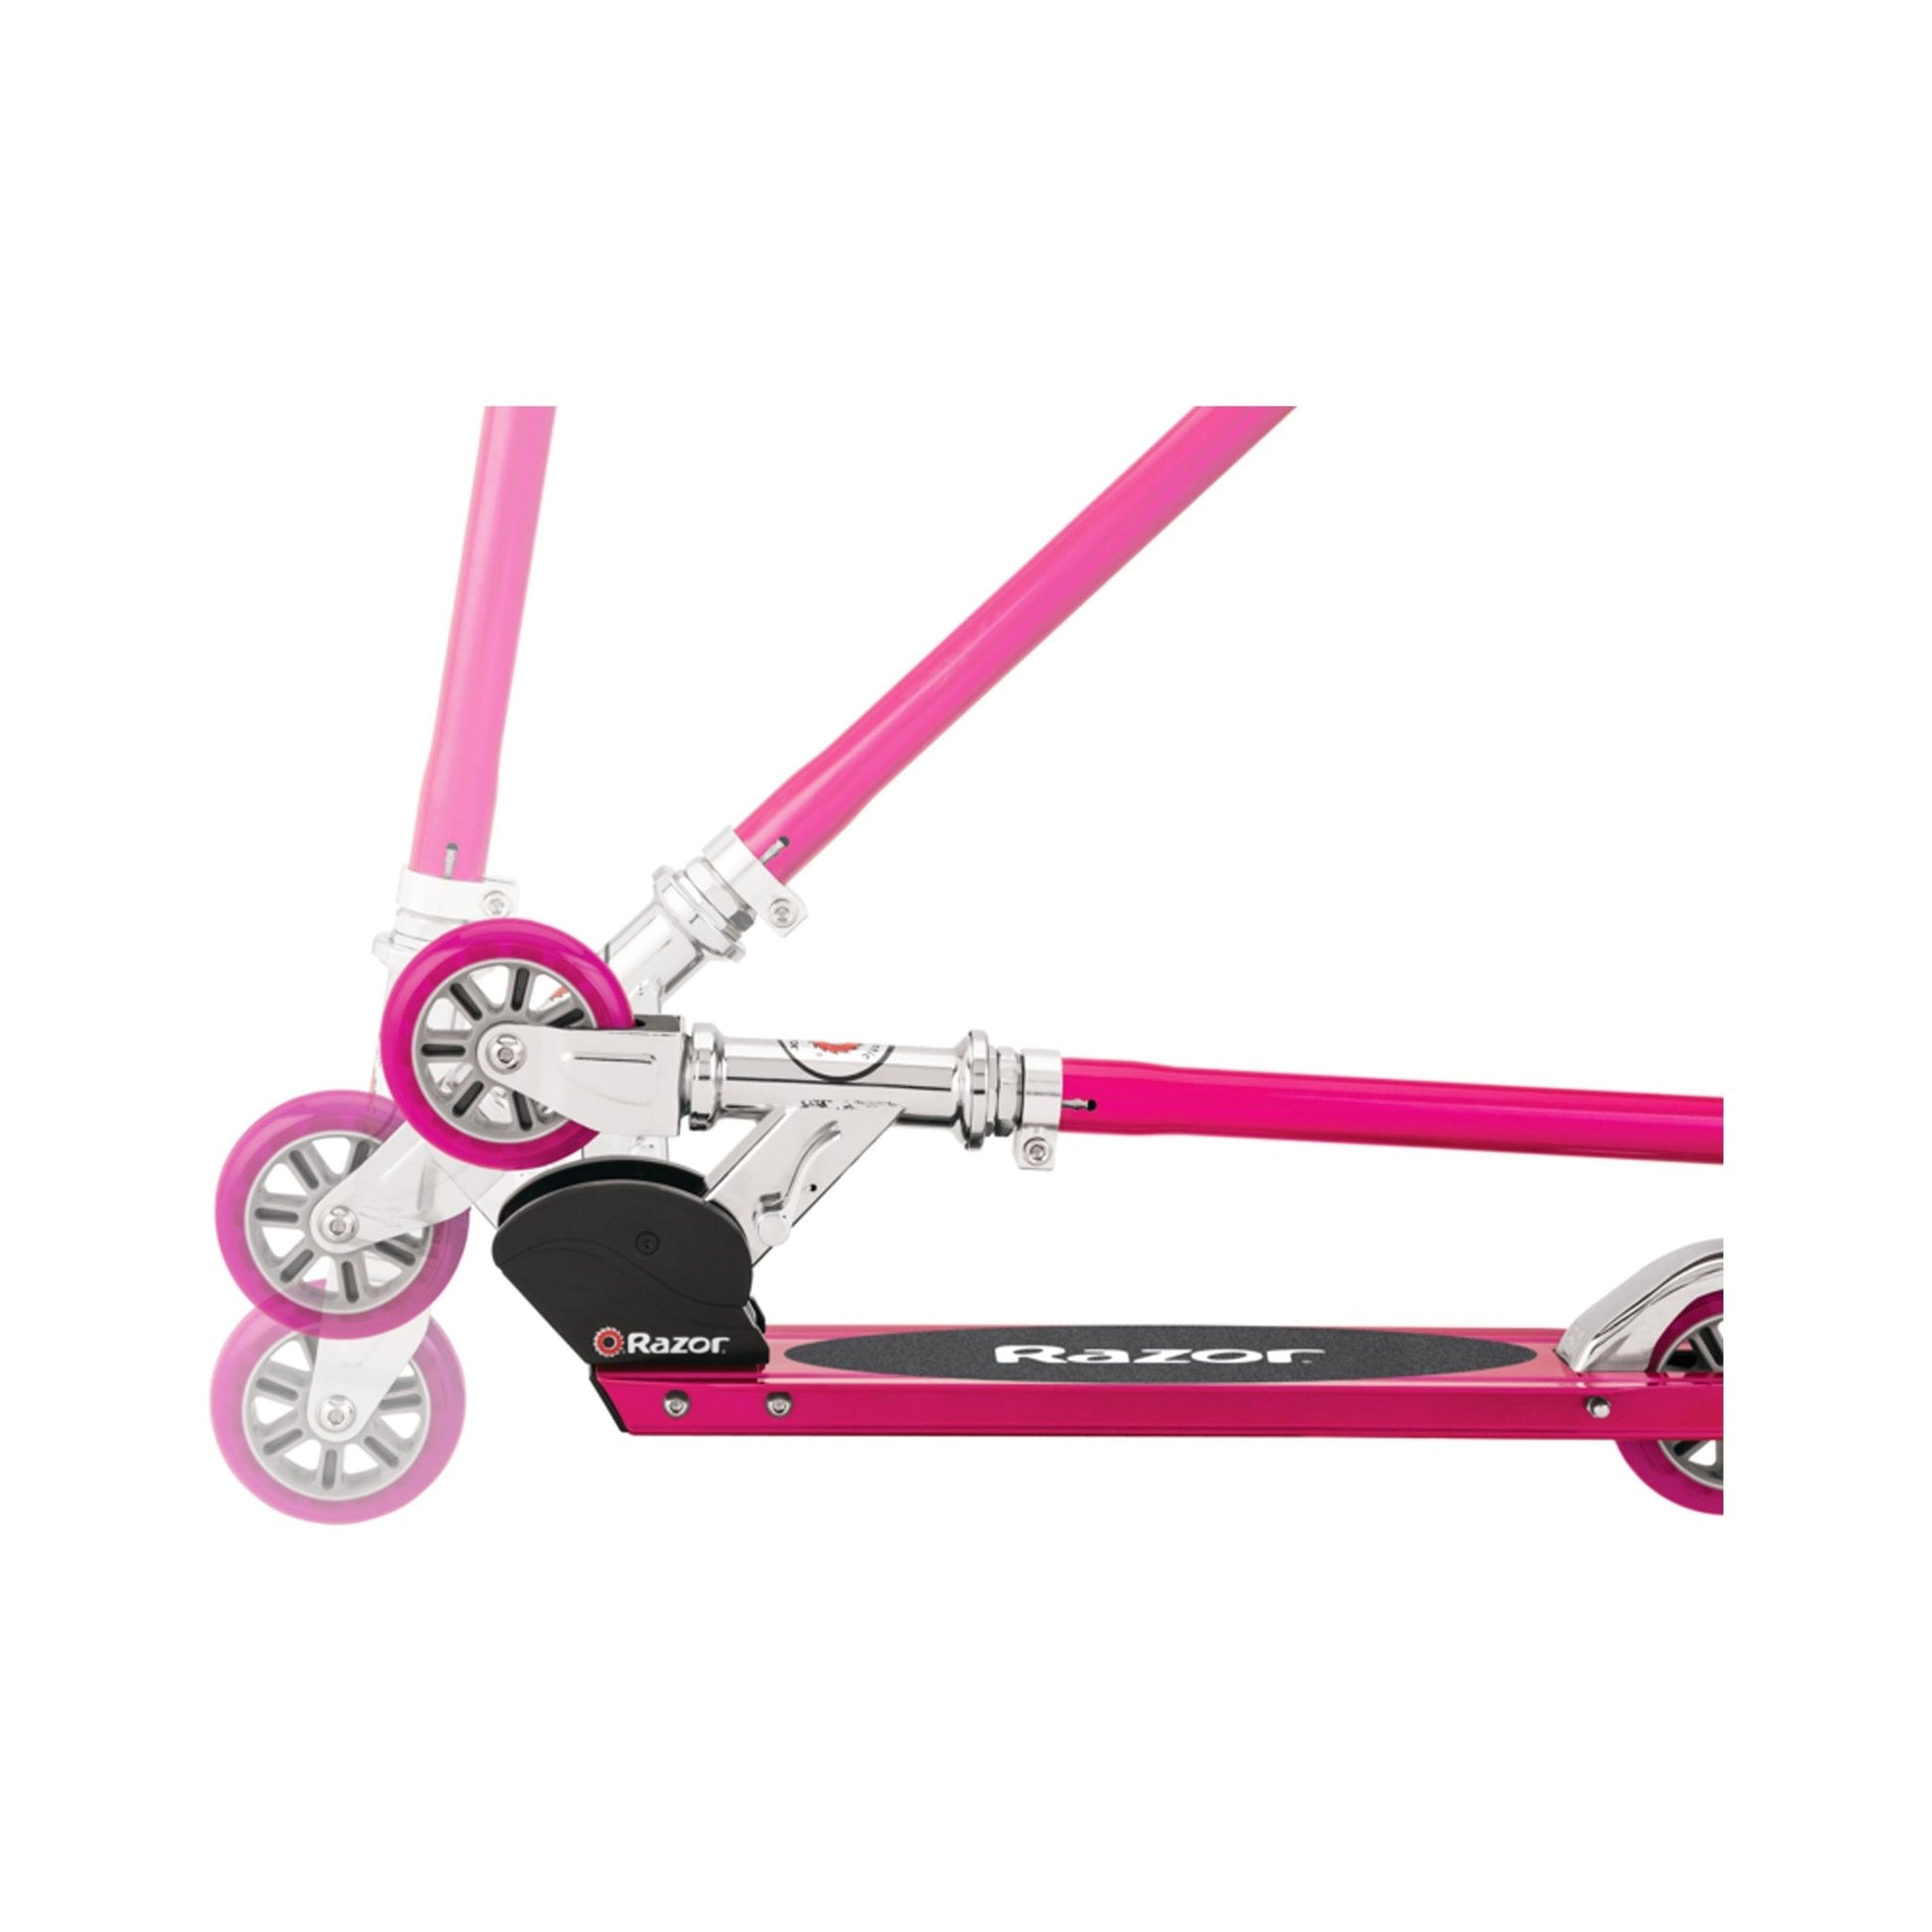 Razor S Sport Scooter - The Online Toy Shop - 2 Wheel Scooter - 2